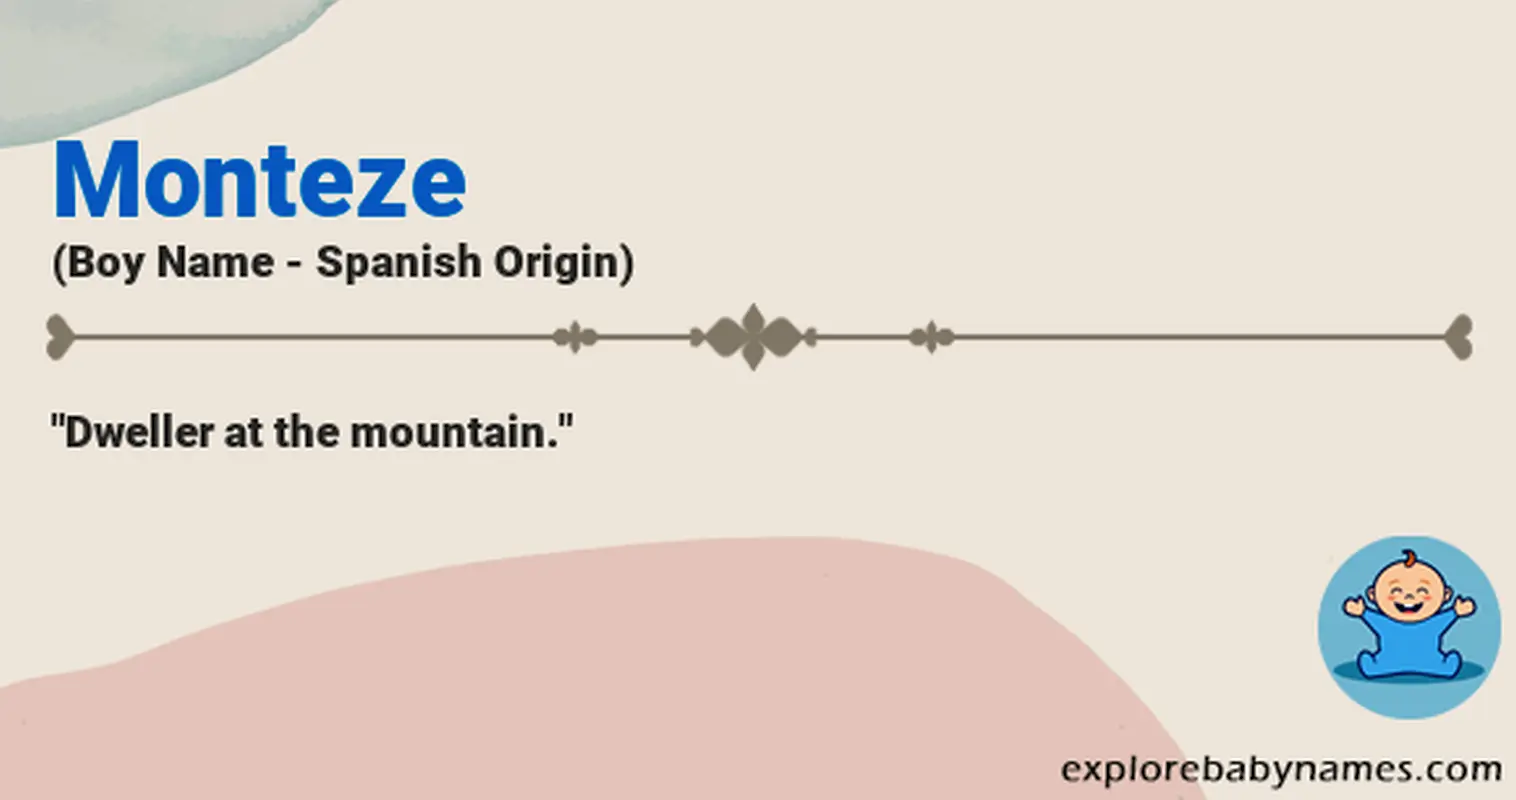 Meaning of Monteze